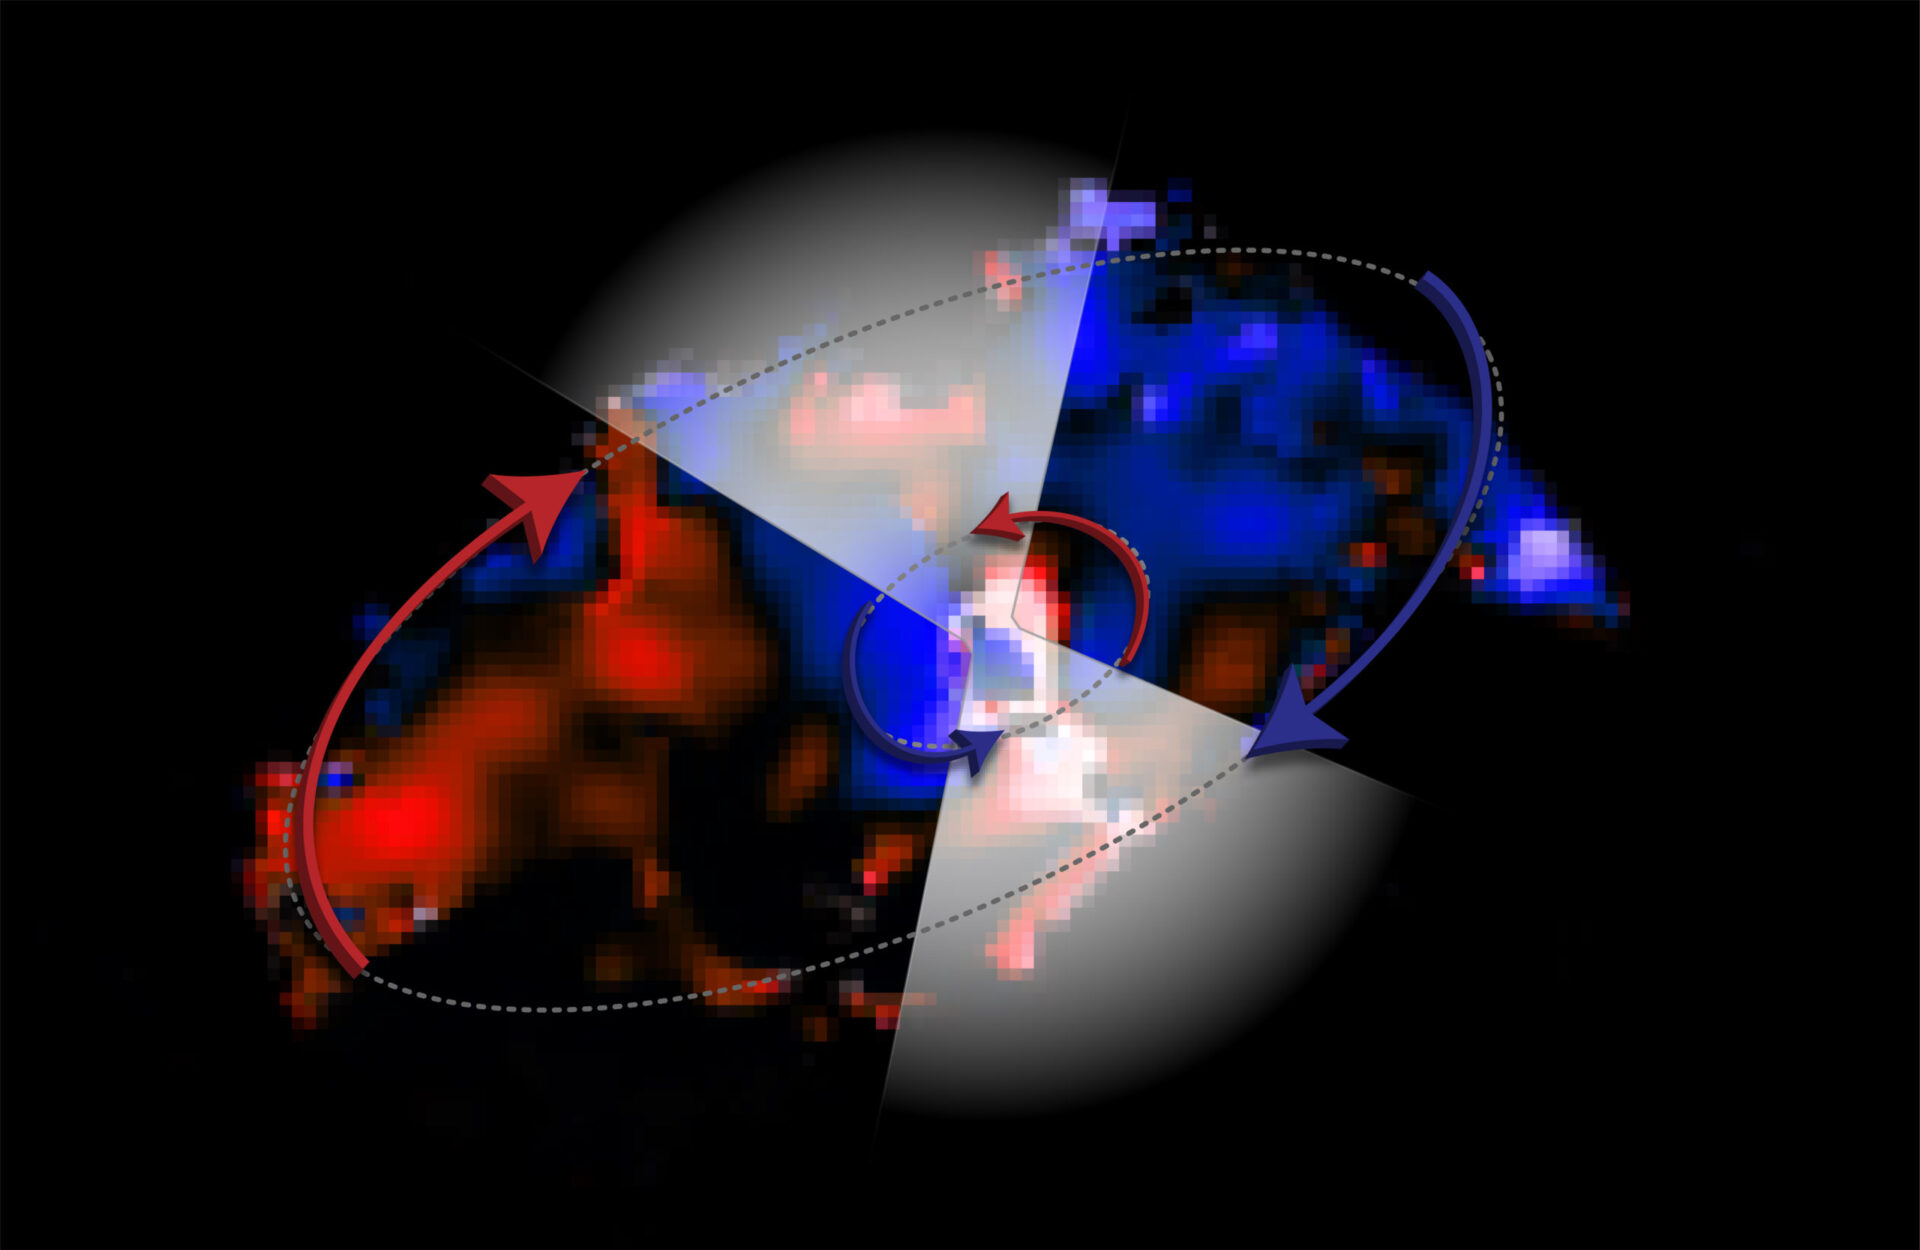 ALMA Observes Counter-intuitive Flows Around Black Hole